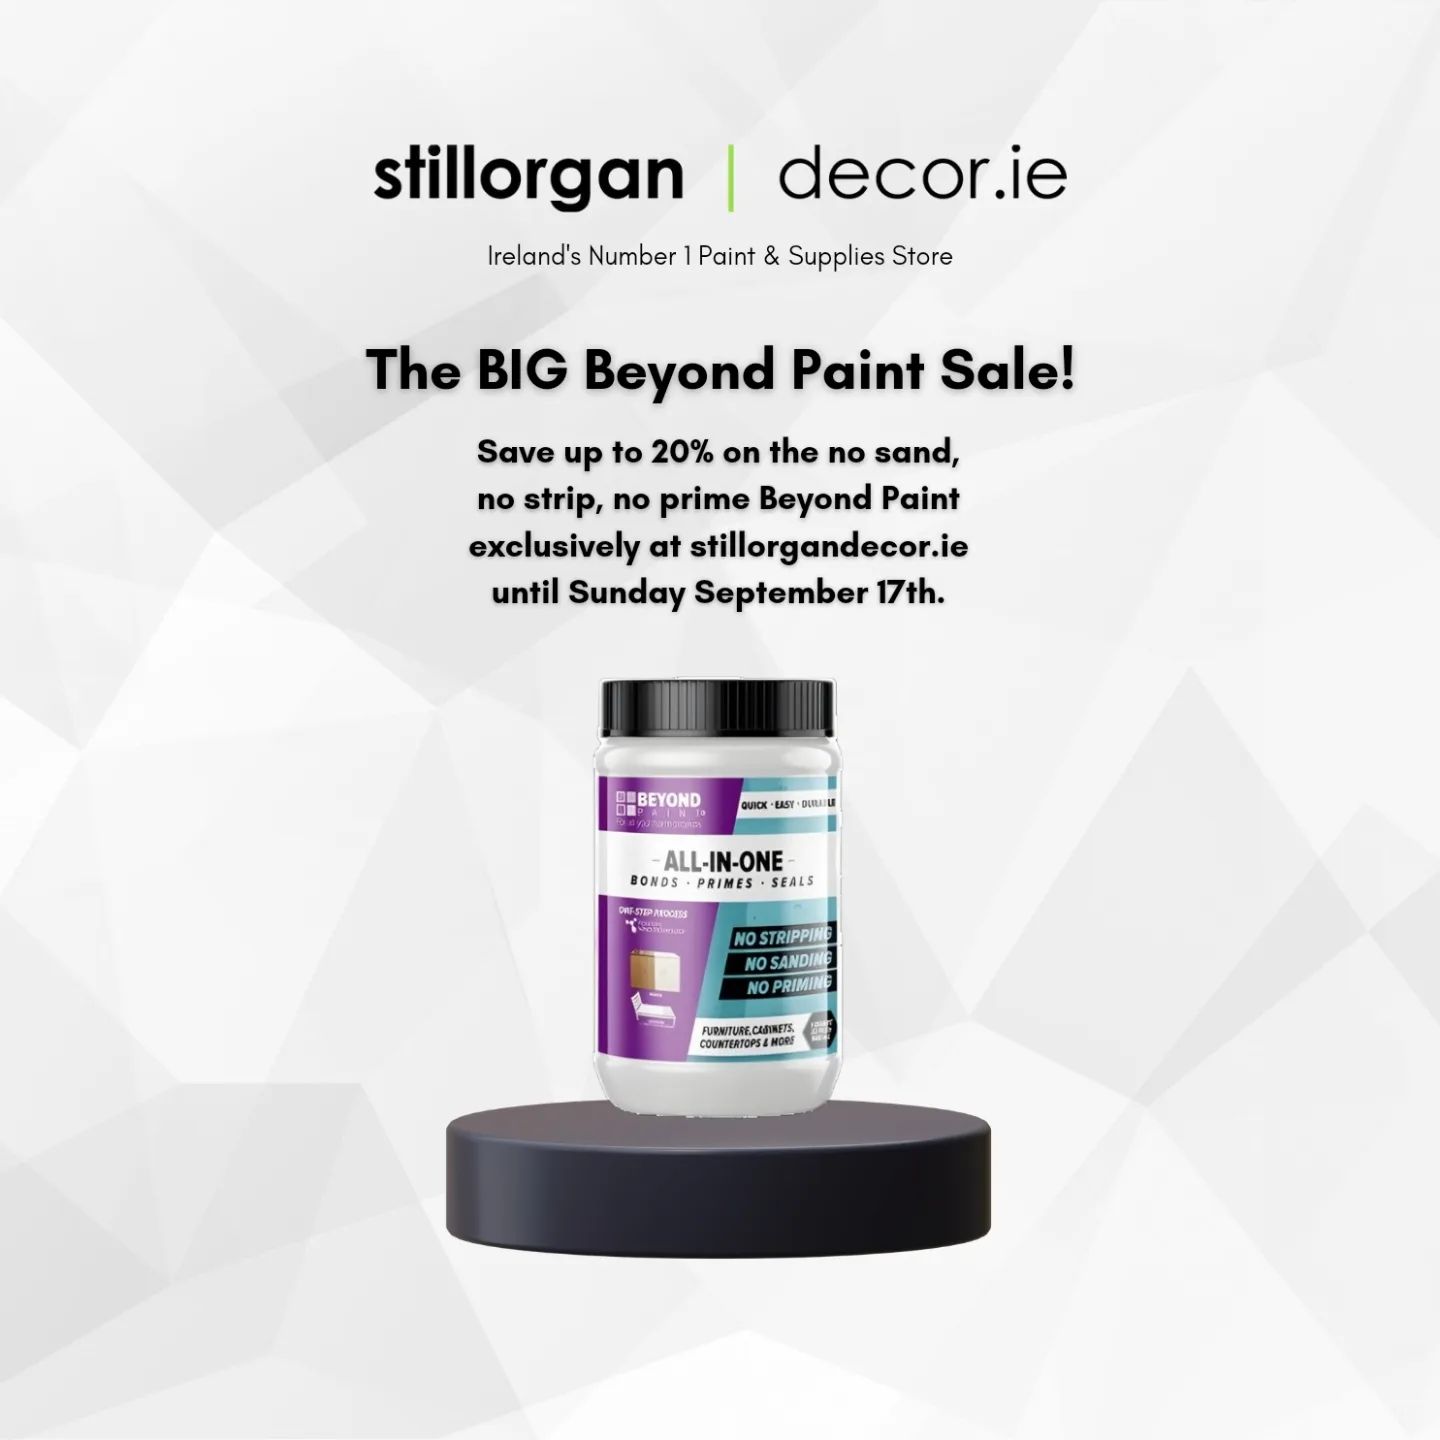 The BIG Beyond Paint sale is now live at stillorgandecor.ie!

Save up to 20% on the no strip, no sand, no prime Beyond Paint range including our Beyond Paint Countertop Kit exclusively at stillorgandecor.ie for delivery nationwide or collection in-store!

Offer available until Sunday September 17th.